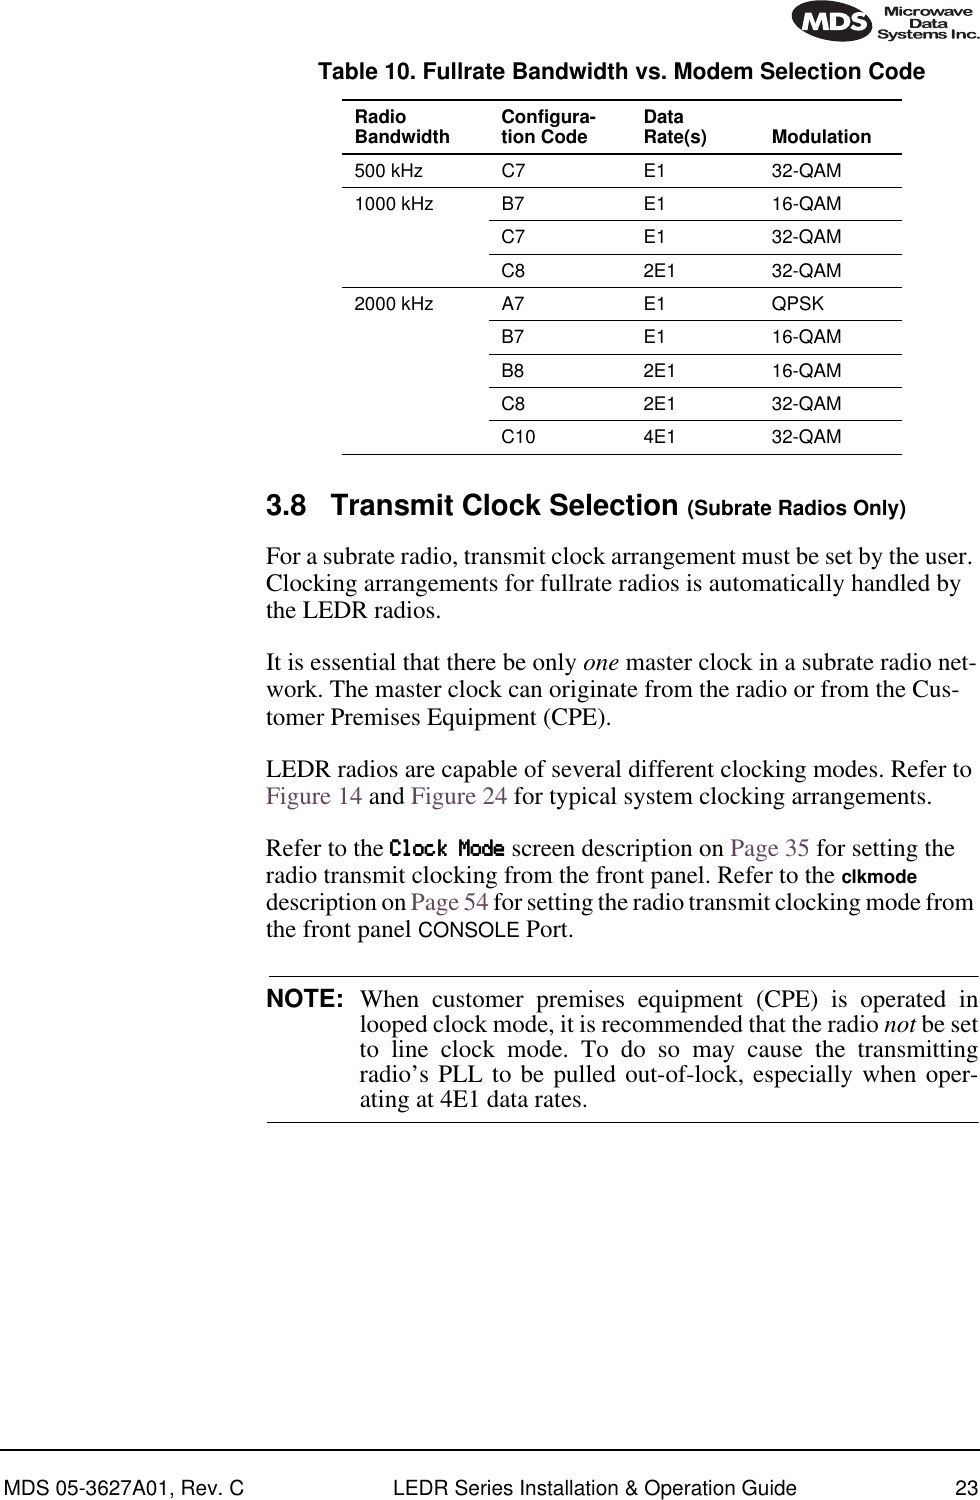 MDS 05-3627A01, Rev. C LEDR Series Installation &amp; Operation Guide 233.8 Transmit Clock Selection (Subrate Radios Only)For a subrate radio, transmit clock arrangement must be set by the user. Clocking arrangements for fullrate radios is automatically handled by the LEDR radios.It is essential that there be only one master clock in a subrate radio net-work. The master clock can originate from the radio or from the Cus-tomer Premises Equipment (CPE). LEDR radios are capable of several different clocking modes. Refer to Figure 14 and Figure 24 for typical system clocking arrangements. Refer to the CCCClllloooocccckkkk    MMMMooooddddeeee screen description on Page 35 for setting the radio transmit clocking from the front panel. Refer to the clkmode description on Page 54 for setting the radio transmit clocking mode from the front panel CONSOLE Port.NOTE: When customer premises equipment (CPE) is operated inlooped clock mode, it is recommended that the radio not be setto line clock mode. To do so may cause the transmittingradio’s PLL to be pulled out-of-lock, especially when oper-ating at 4E1 data rates.Table 10. Fullrate Bandwidth vs. Modem Selection Code  Radio Bandwidth Configura-tion Code Data Rate(s) Modulation500 kHz C7 E1 32-QAM1000 kHz B7 E1 16-QAMC7 E1 32-QAMC8 2E1 32-QAM2000 kHz A7 E1 QPSKB7 E1 16-QAMB8 2E1 16-QAMC8 2E1 32-QAMC10 4E1 32-QAM